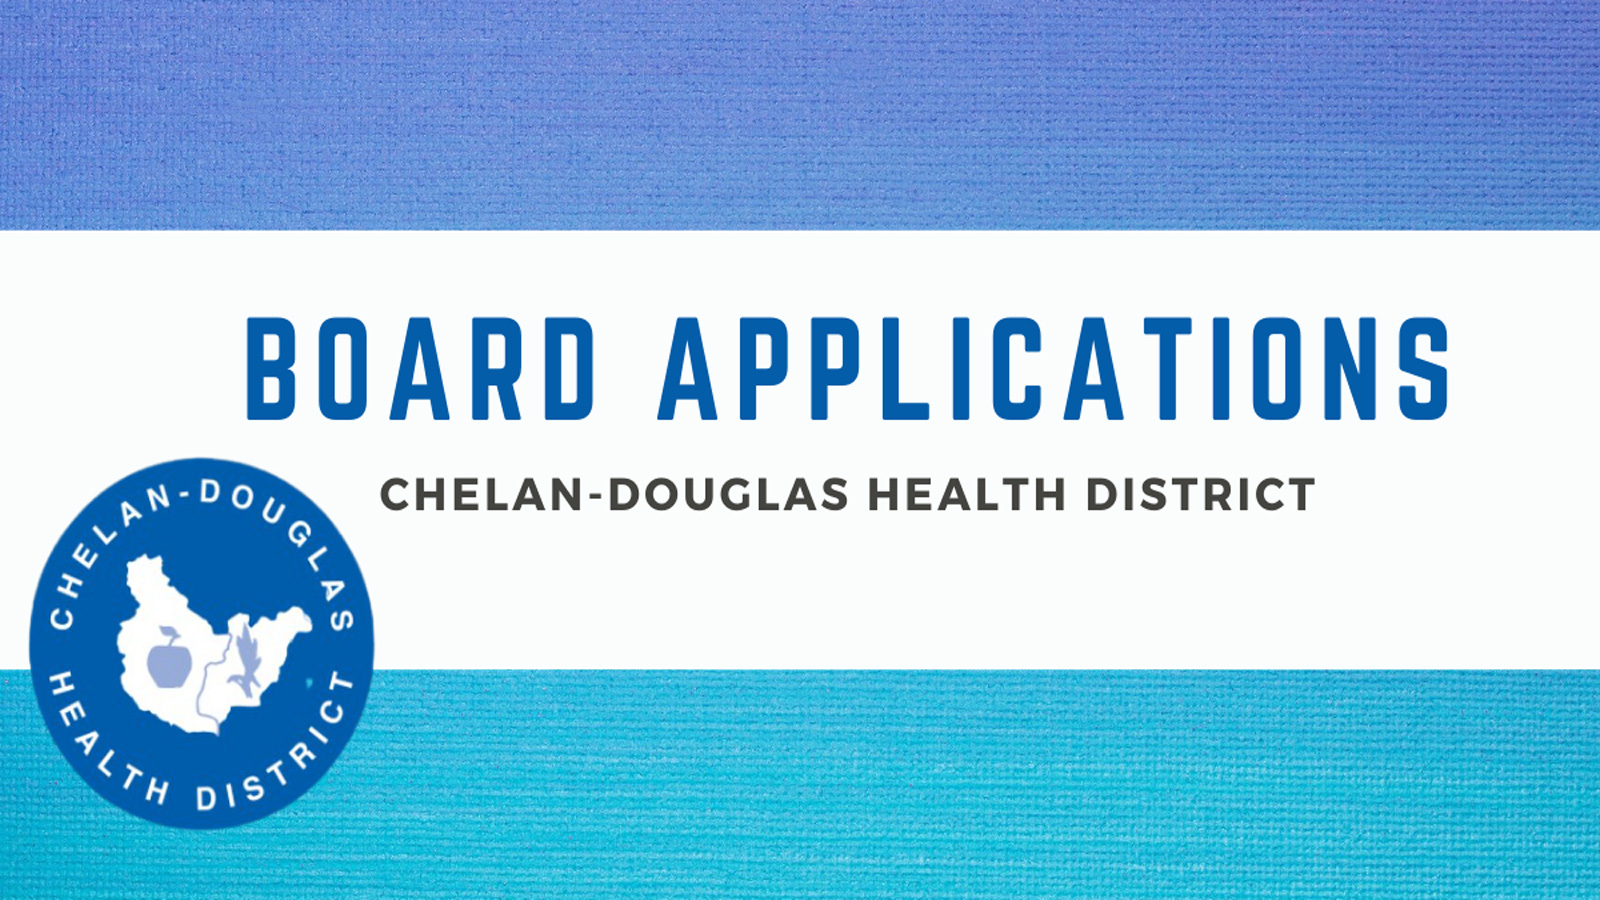 Health District calls for applications for new board members